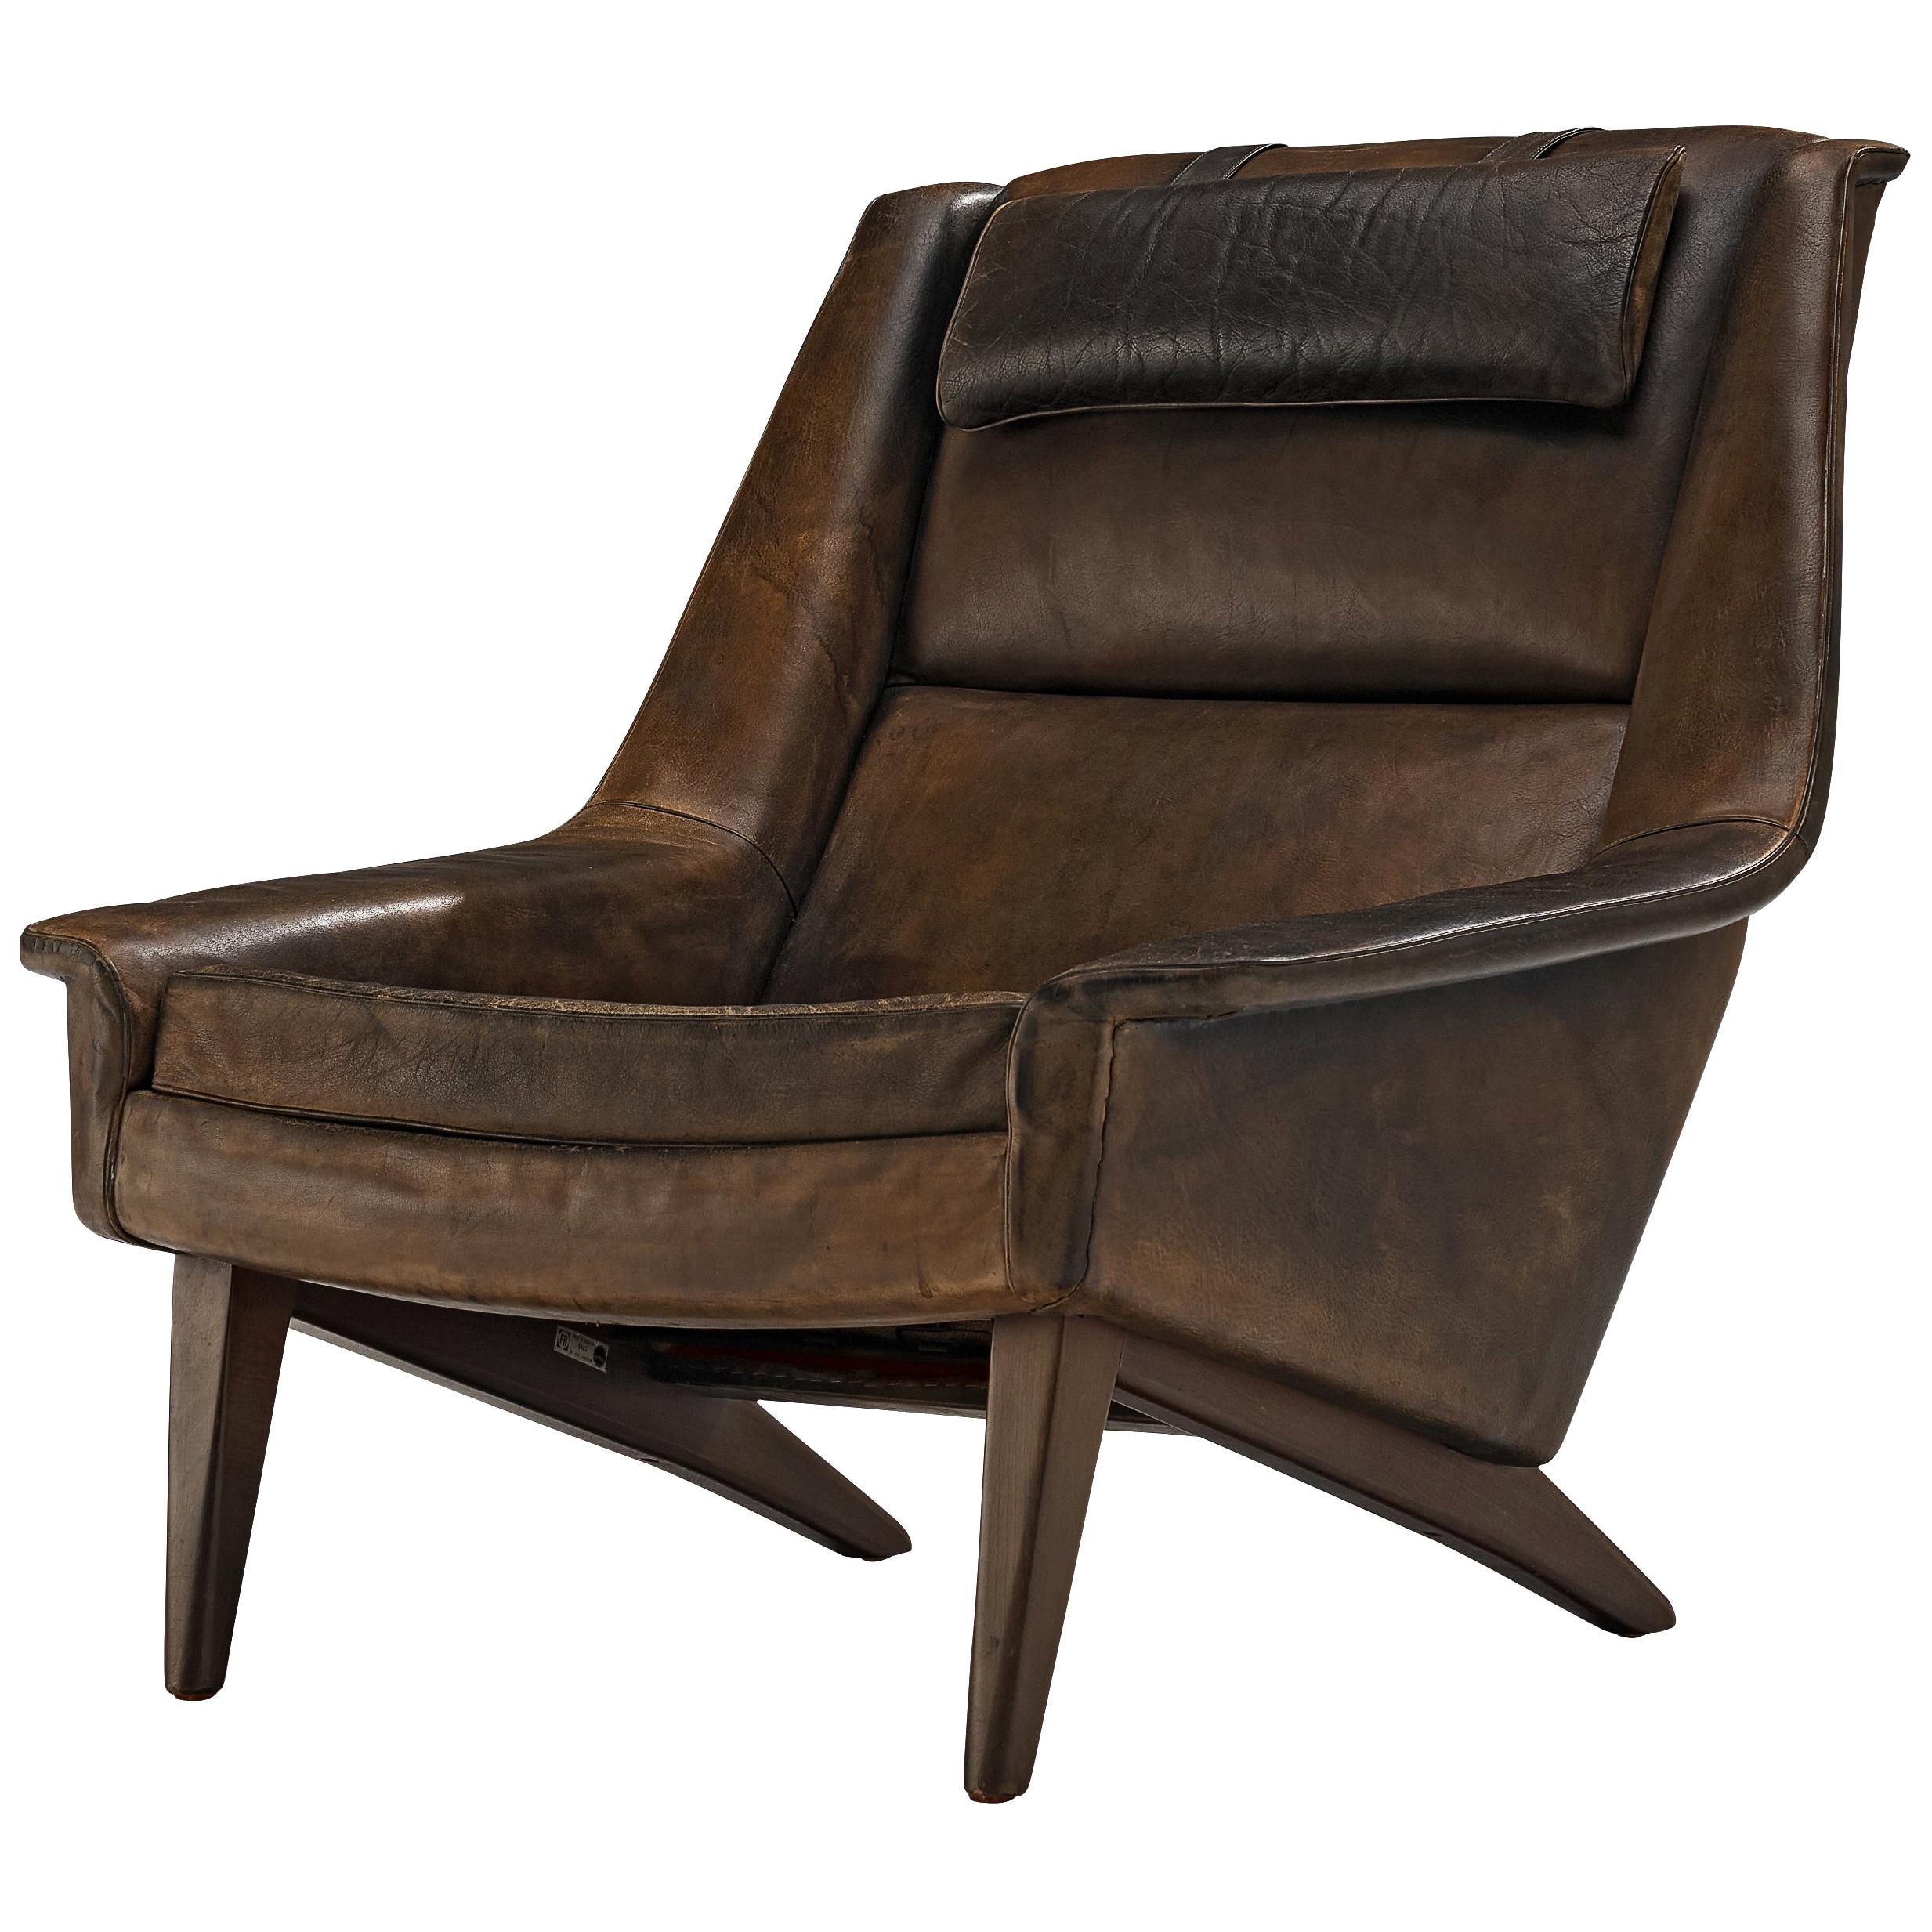 Folke Ohlsson Lounge Chair in Original Brown Leather